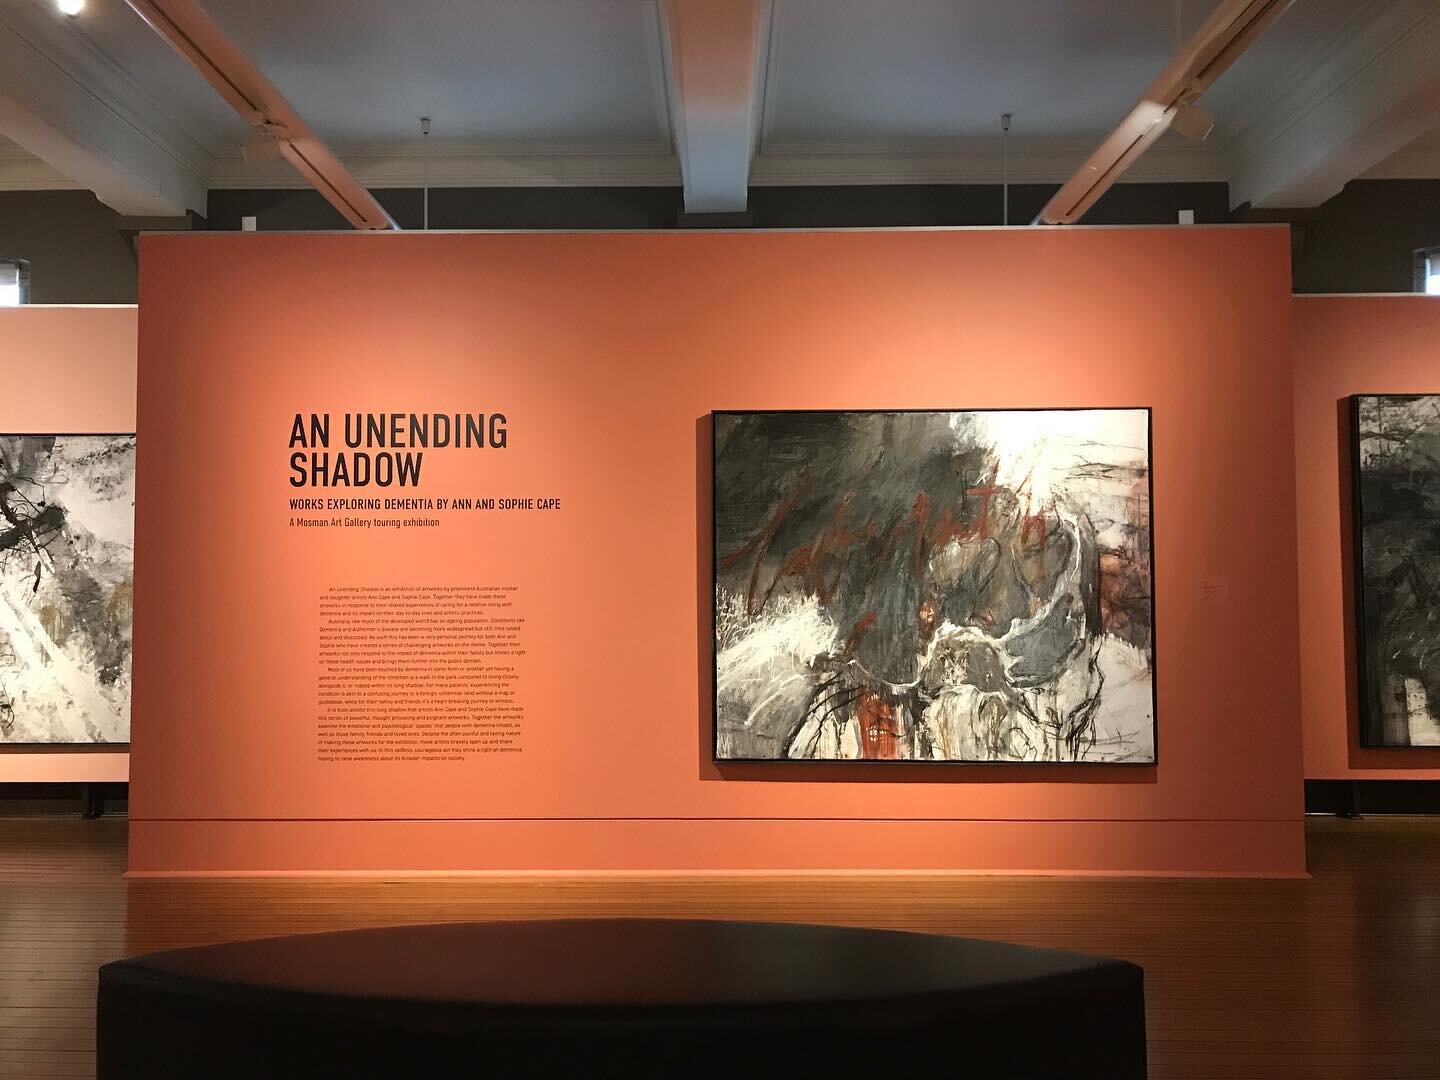 Now on &lsquo;AN UNENDING SHADOW: WORKS EXPLORING DEMENTIA BY ANN AND SOPHIE CAPE&rsquo;
@maitlandregionalartgallery until MAY 23

An Unending Shadow is an exhibition of artworks by prominent Australian mother and daughter artists, Ann and Sophie Cap